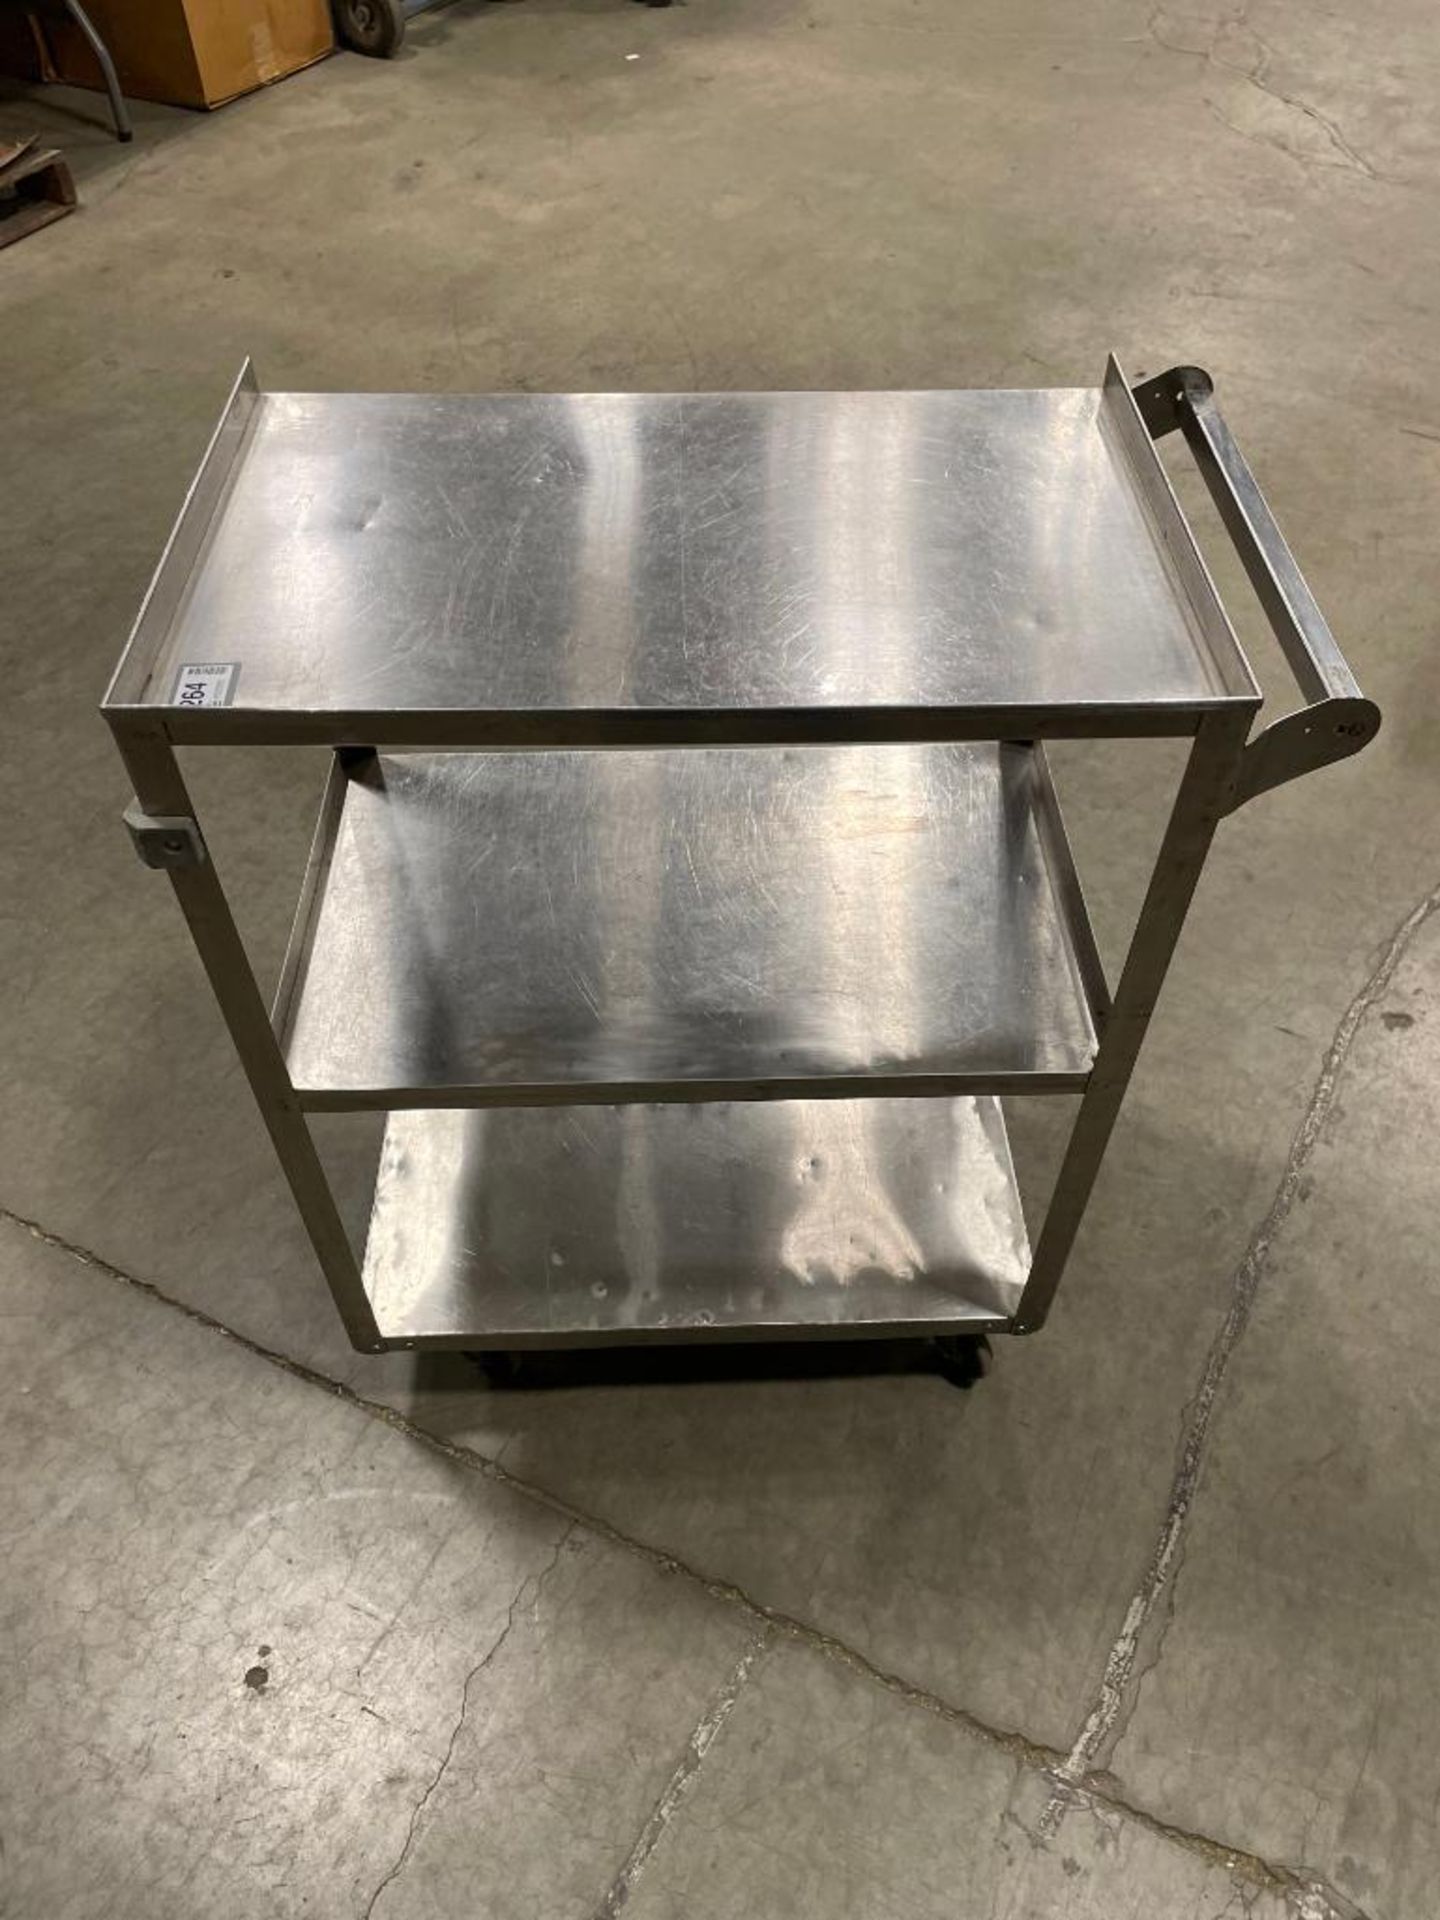 LAKESIDE 411 STAINLESS STEEL UTILITY CART 15" X 24" - 500 LB CAPACITY - Image 4 of 6